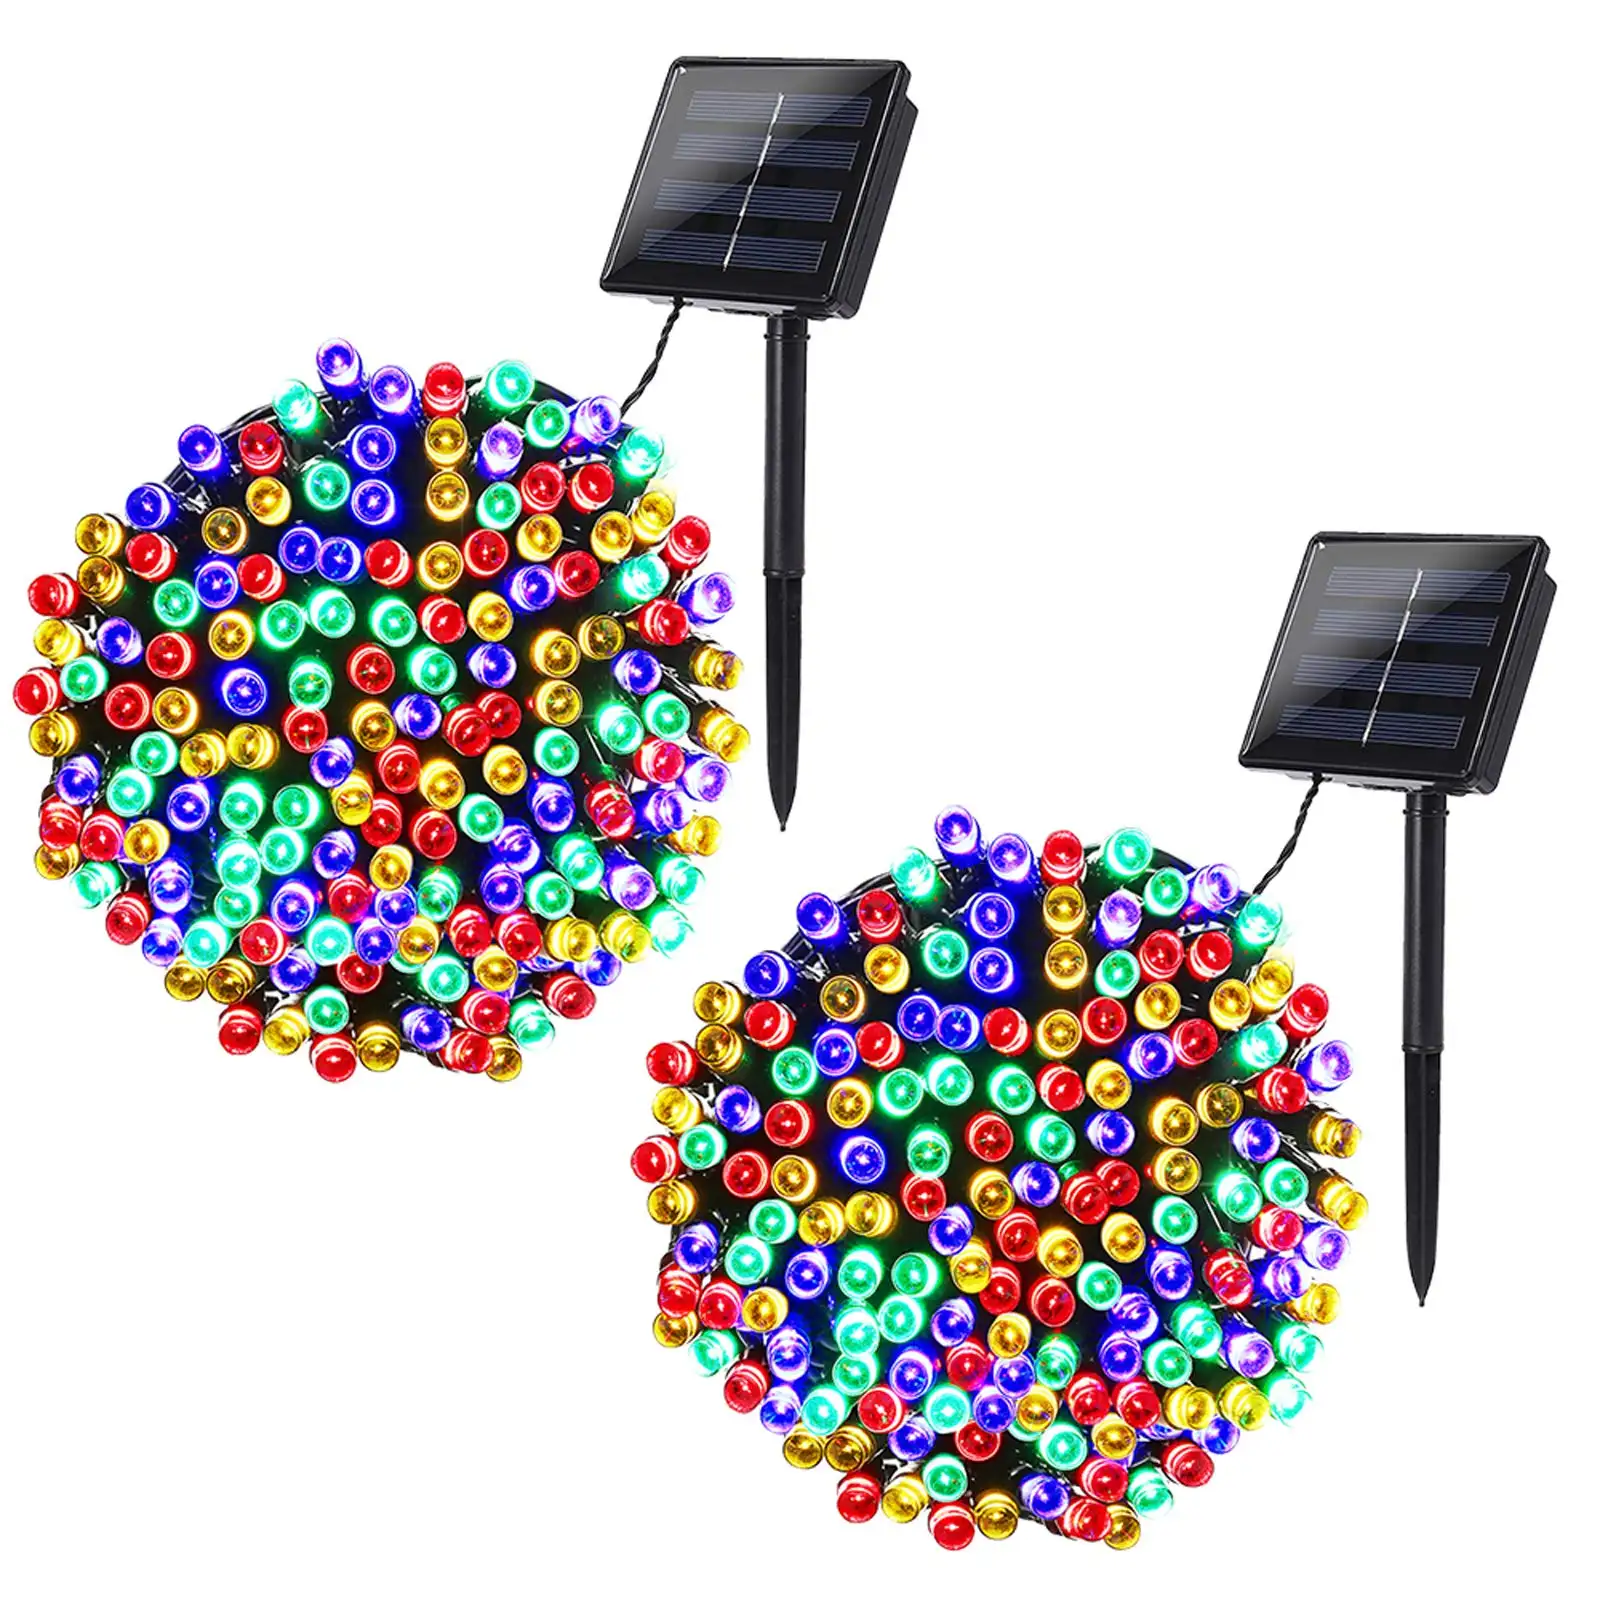 Hot sell waterproof IP65 Festival Holiday Lighting Solar powered Christmas outdoor Decorations multi color LED String Light